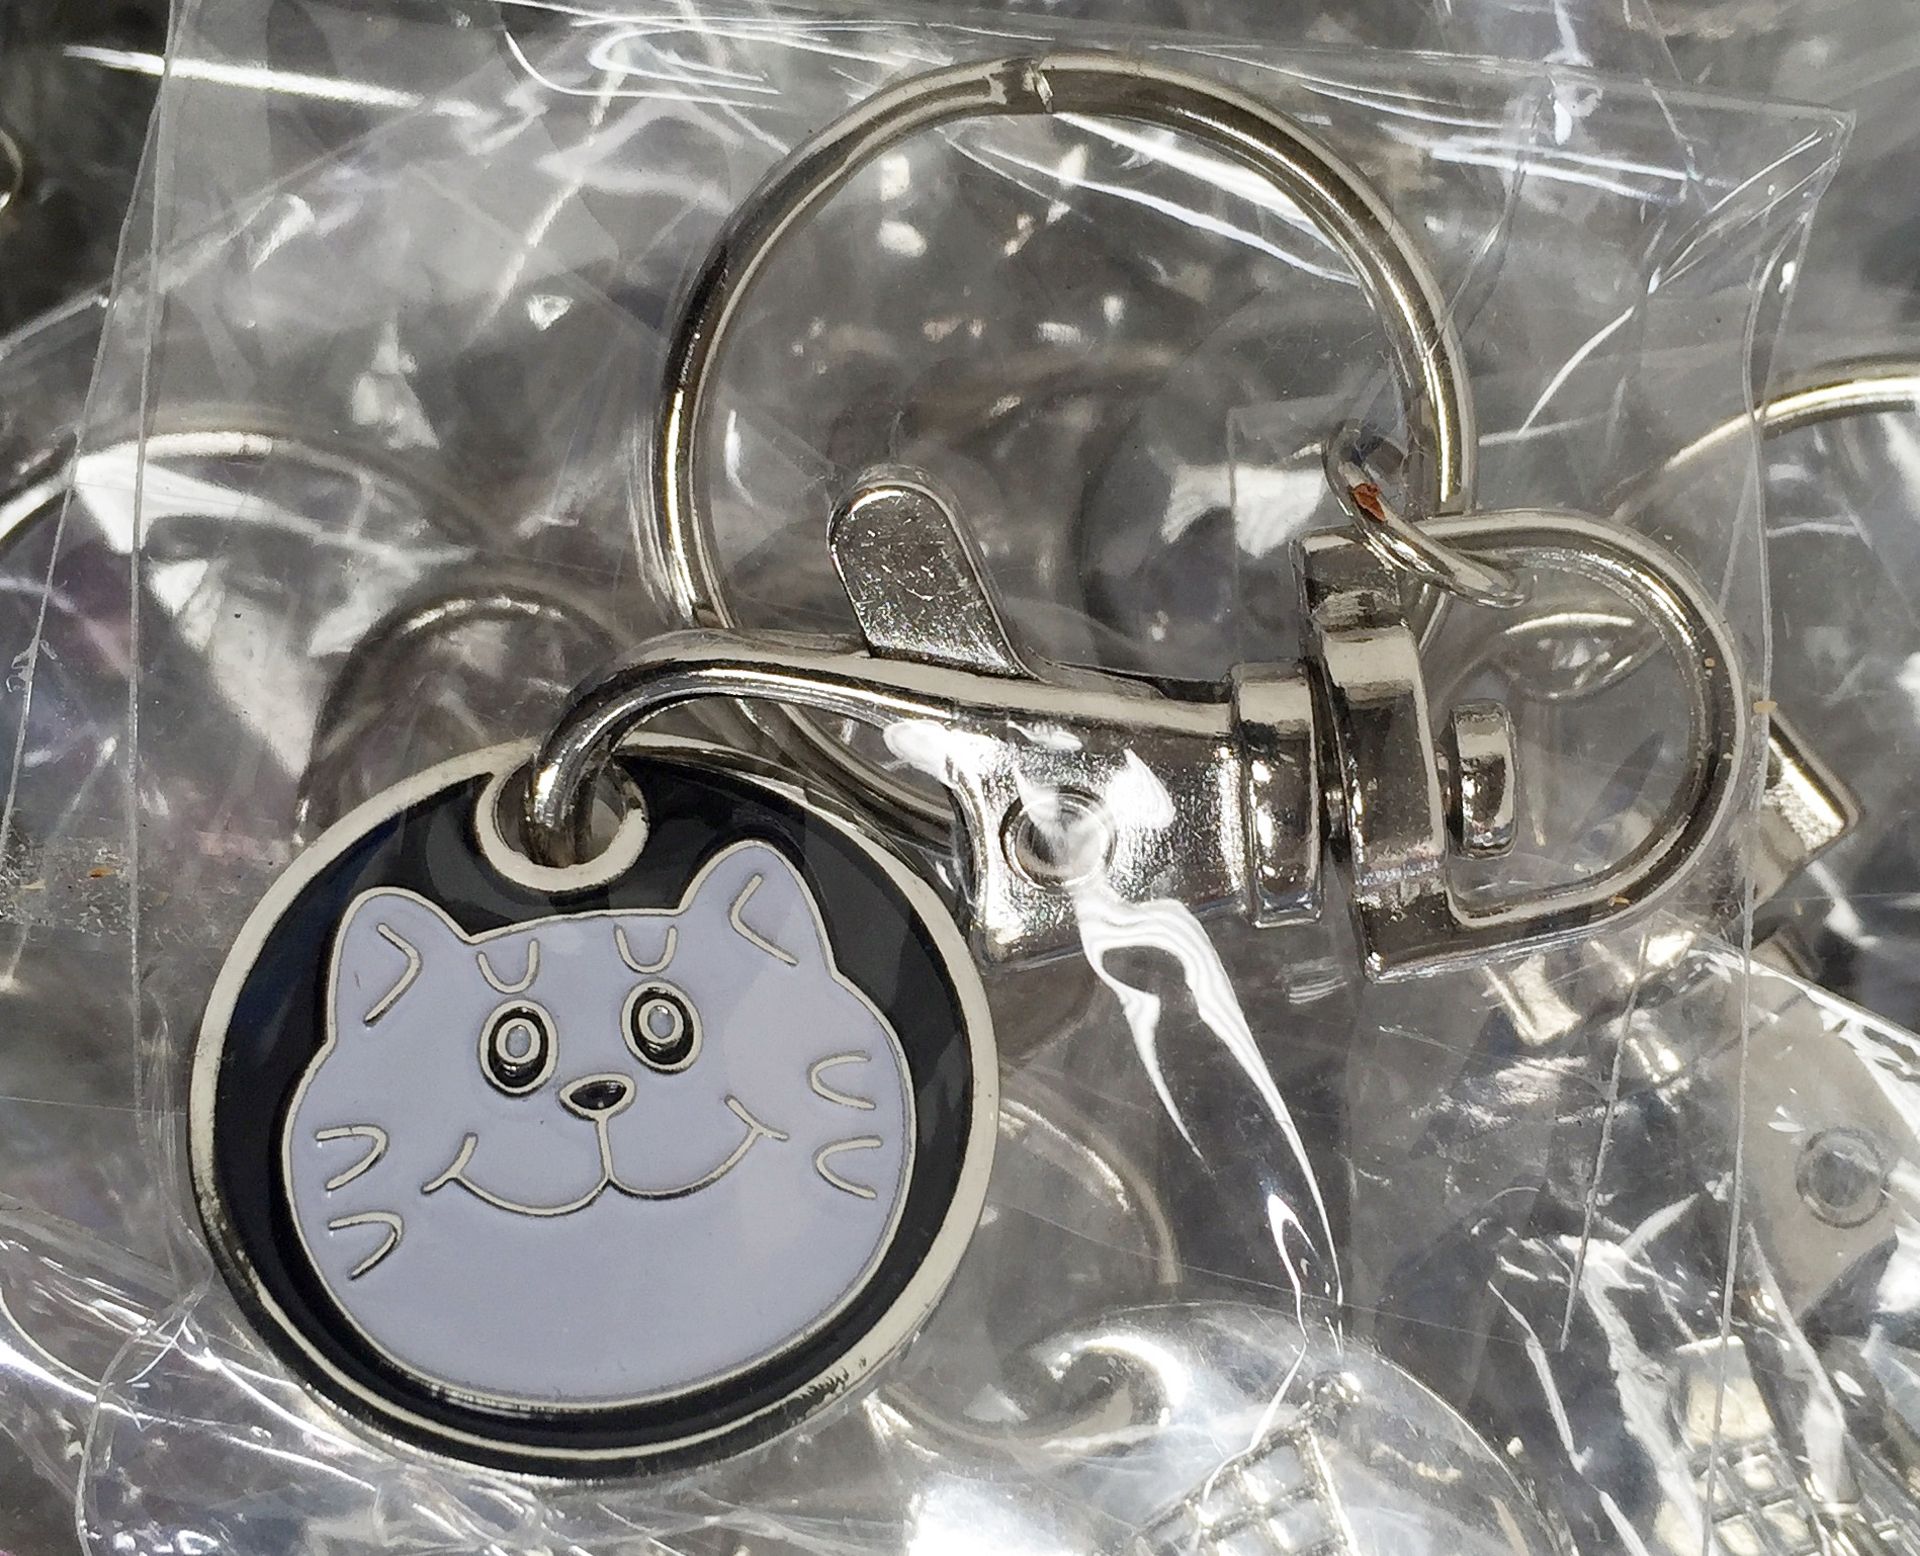 1,000 x EURO Shopping Trolley / Locker Coin Token Keychains - New & Sealed Stock - Resale Ready -